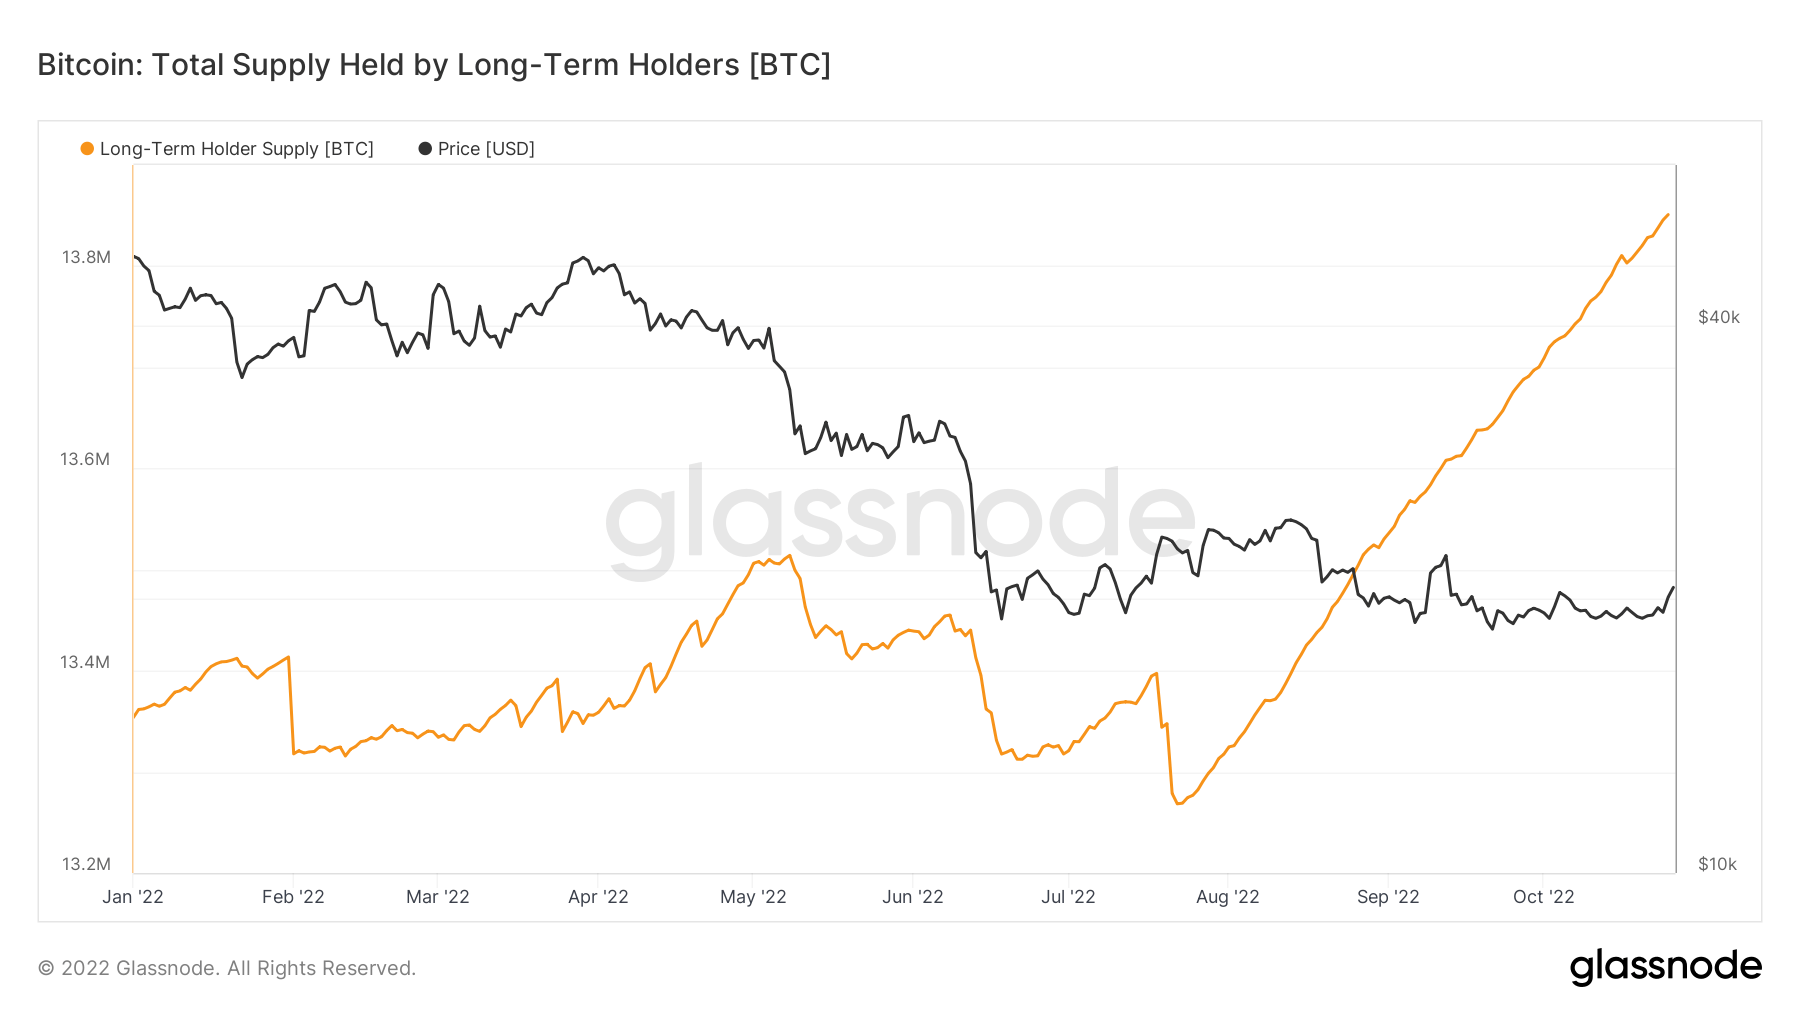 Bitcoin supply by long-term holders